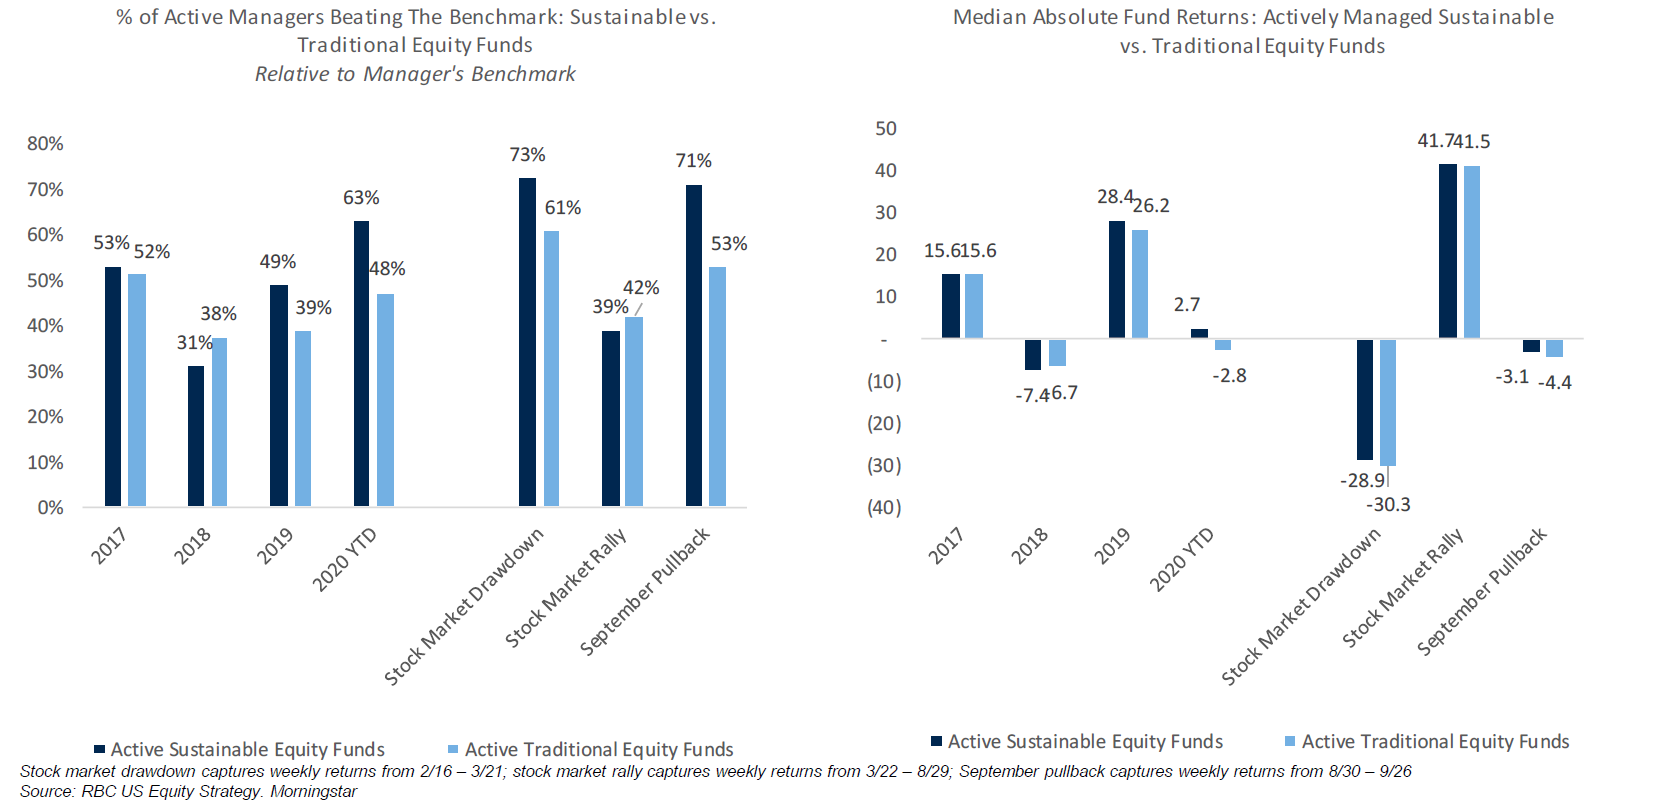 Graph: % of Active Managers Beating the Benchmark, Median Absolute Fund Returns